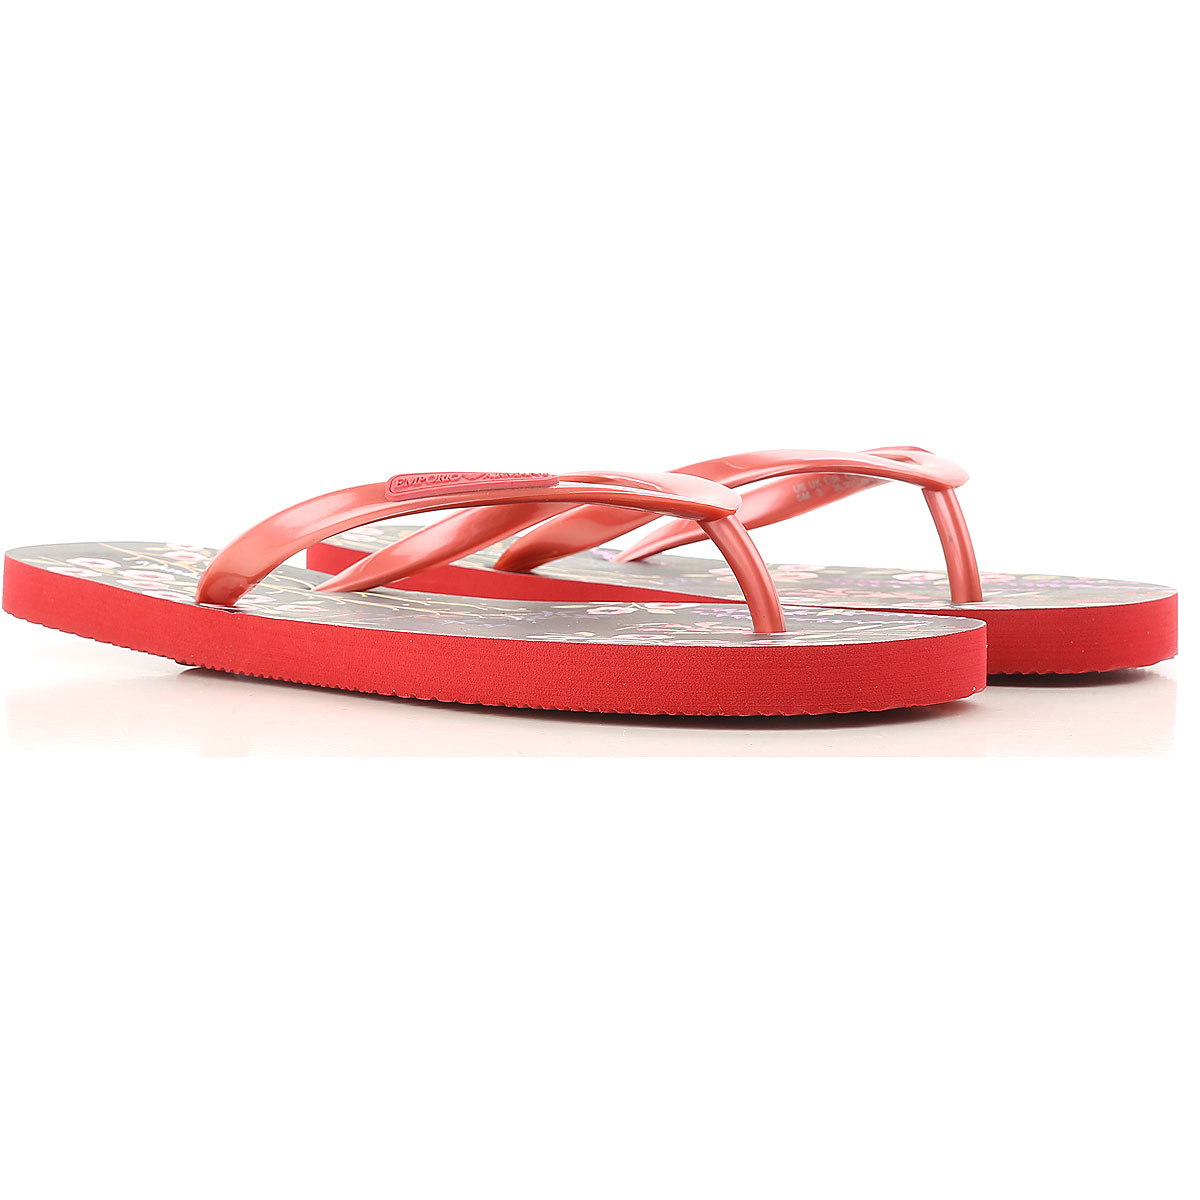 Emporio Armani Chaussure Tong Femme, Rouge, PVC, 2017, 36 37 38 39 40 41